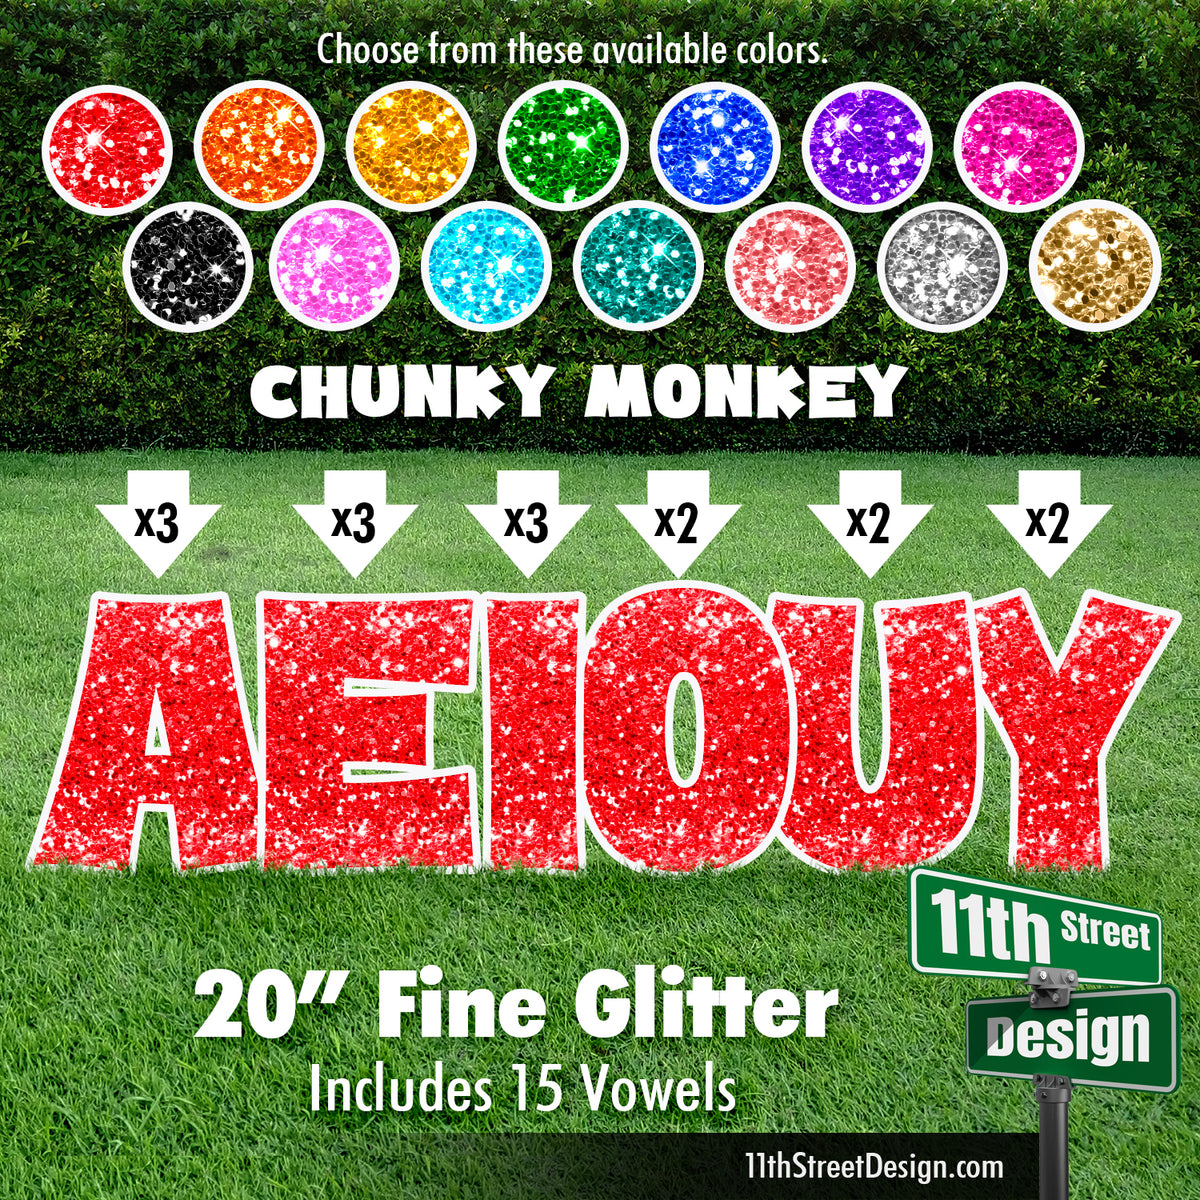 Fine Glitter 20&quot; Chunky Monkey Yard Card Set Includes 15 Vowels